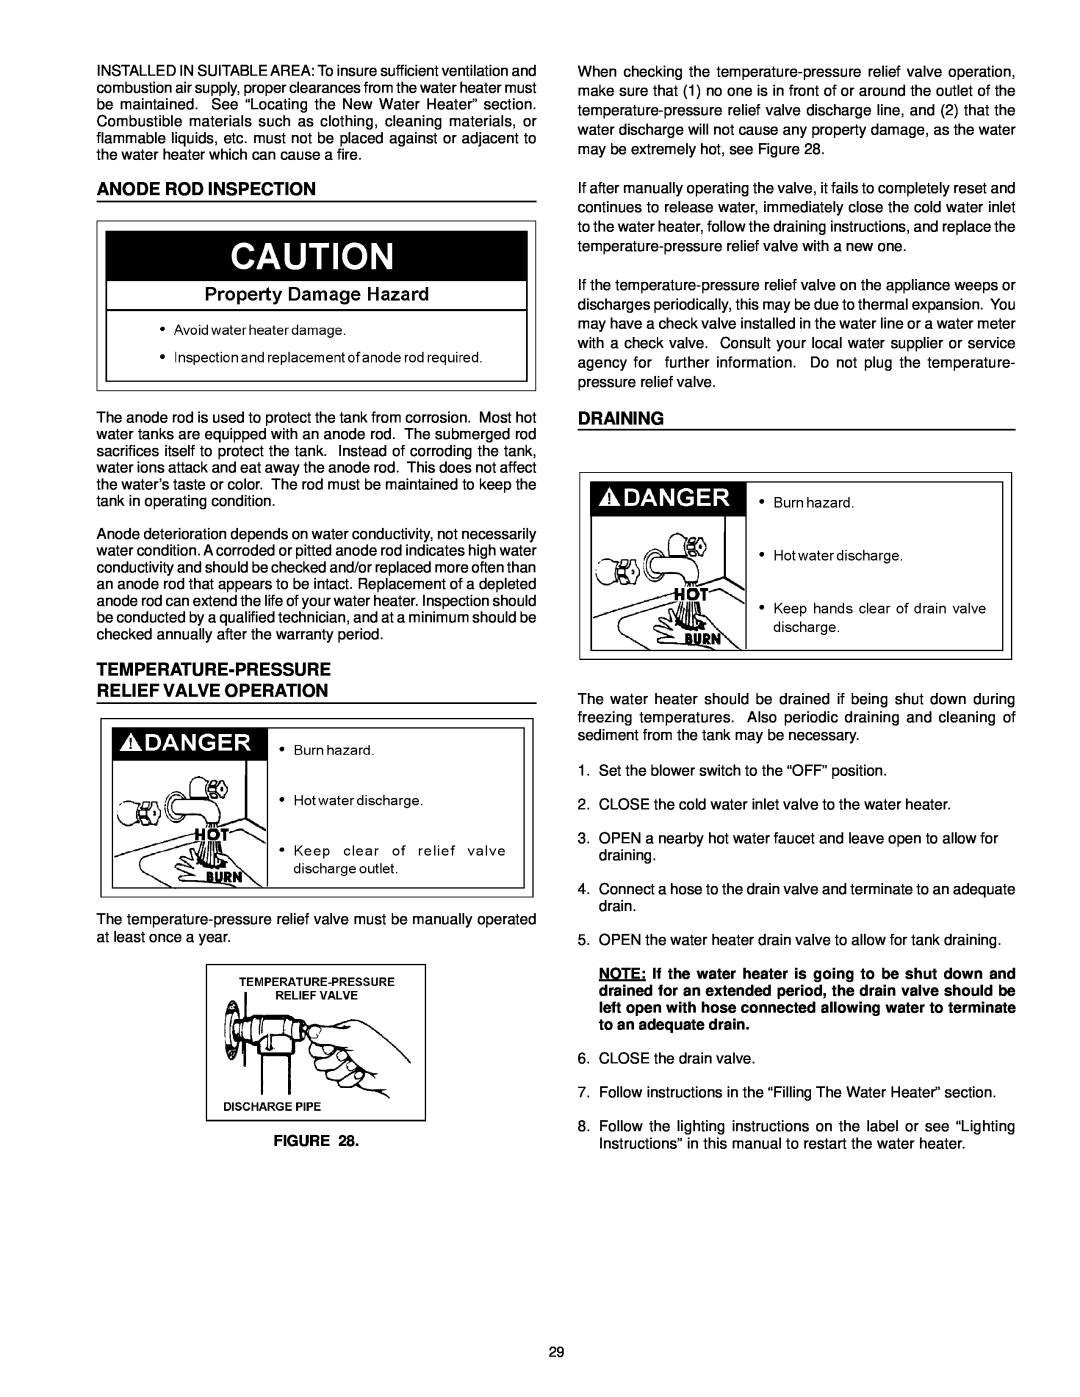 A.O. Smith ARGSS02708 instruction manual Anode Rod Inspection, Temperature-Pressure Relief Valve Operation, Draining 